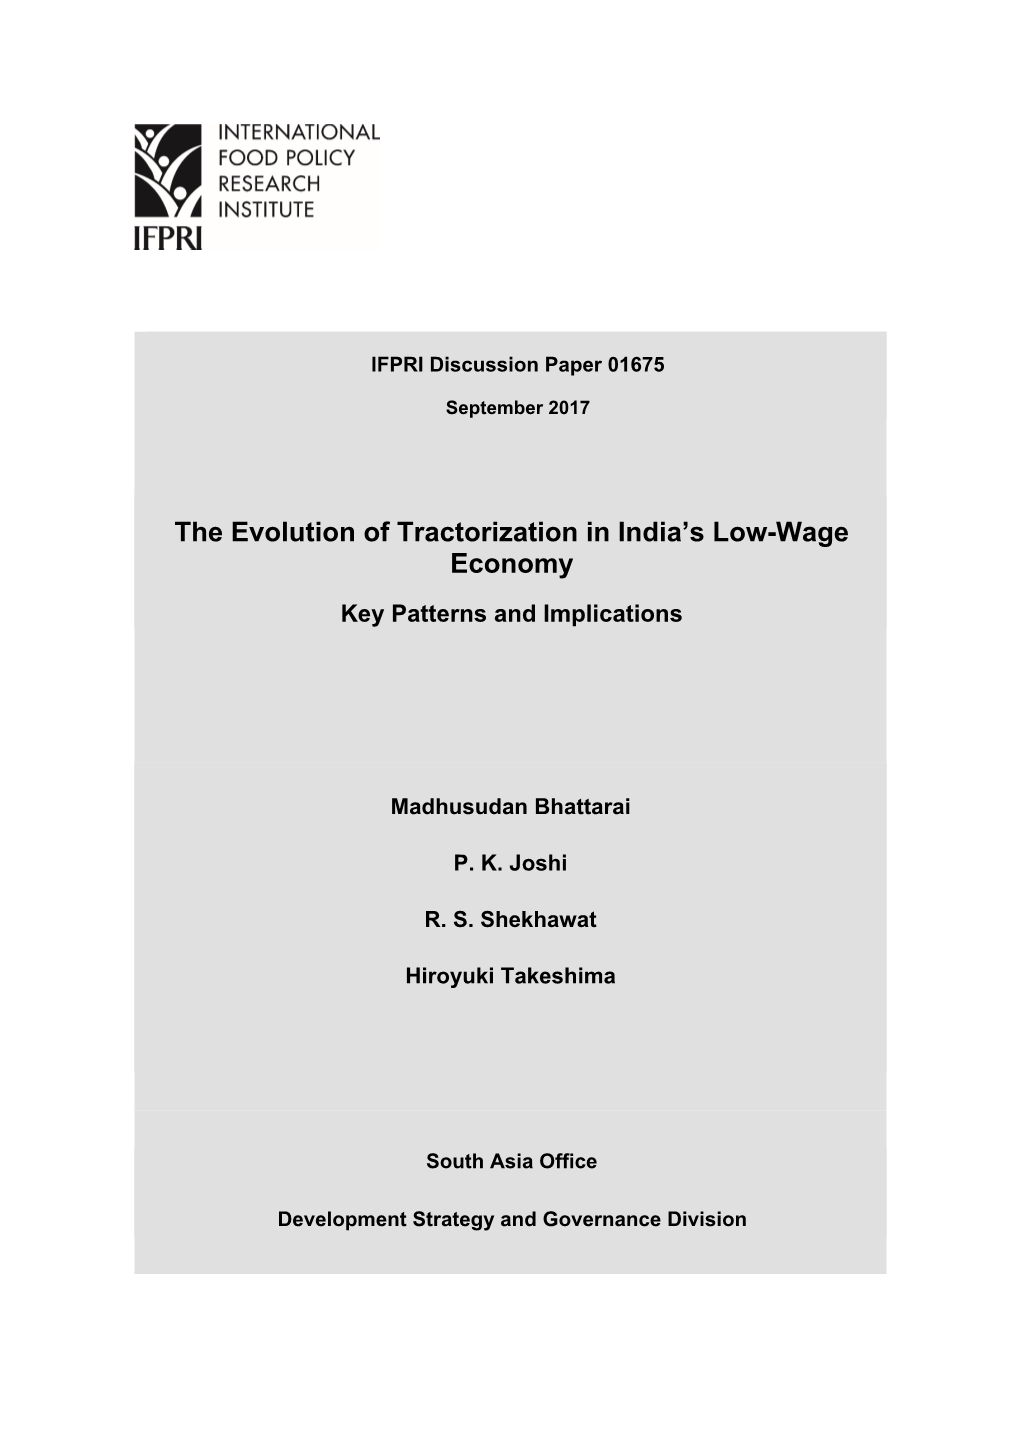 The Evolution of Tractorization in India's Low-Wage Economy